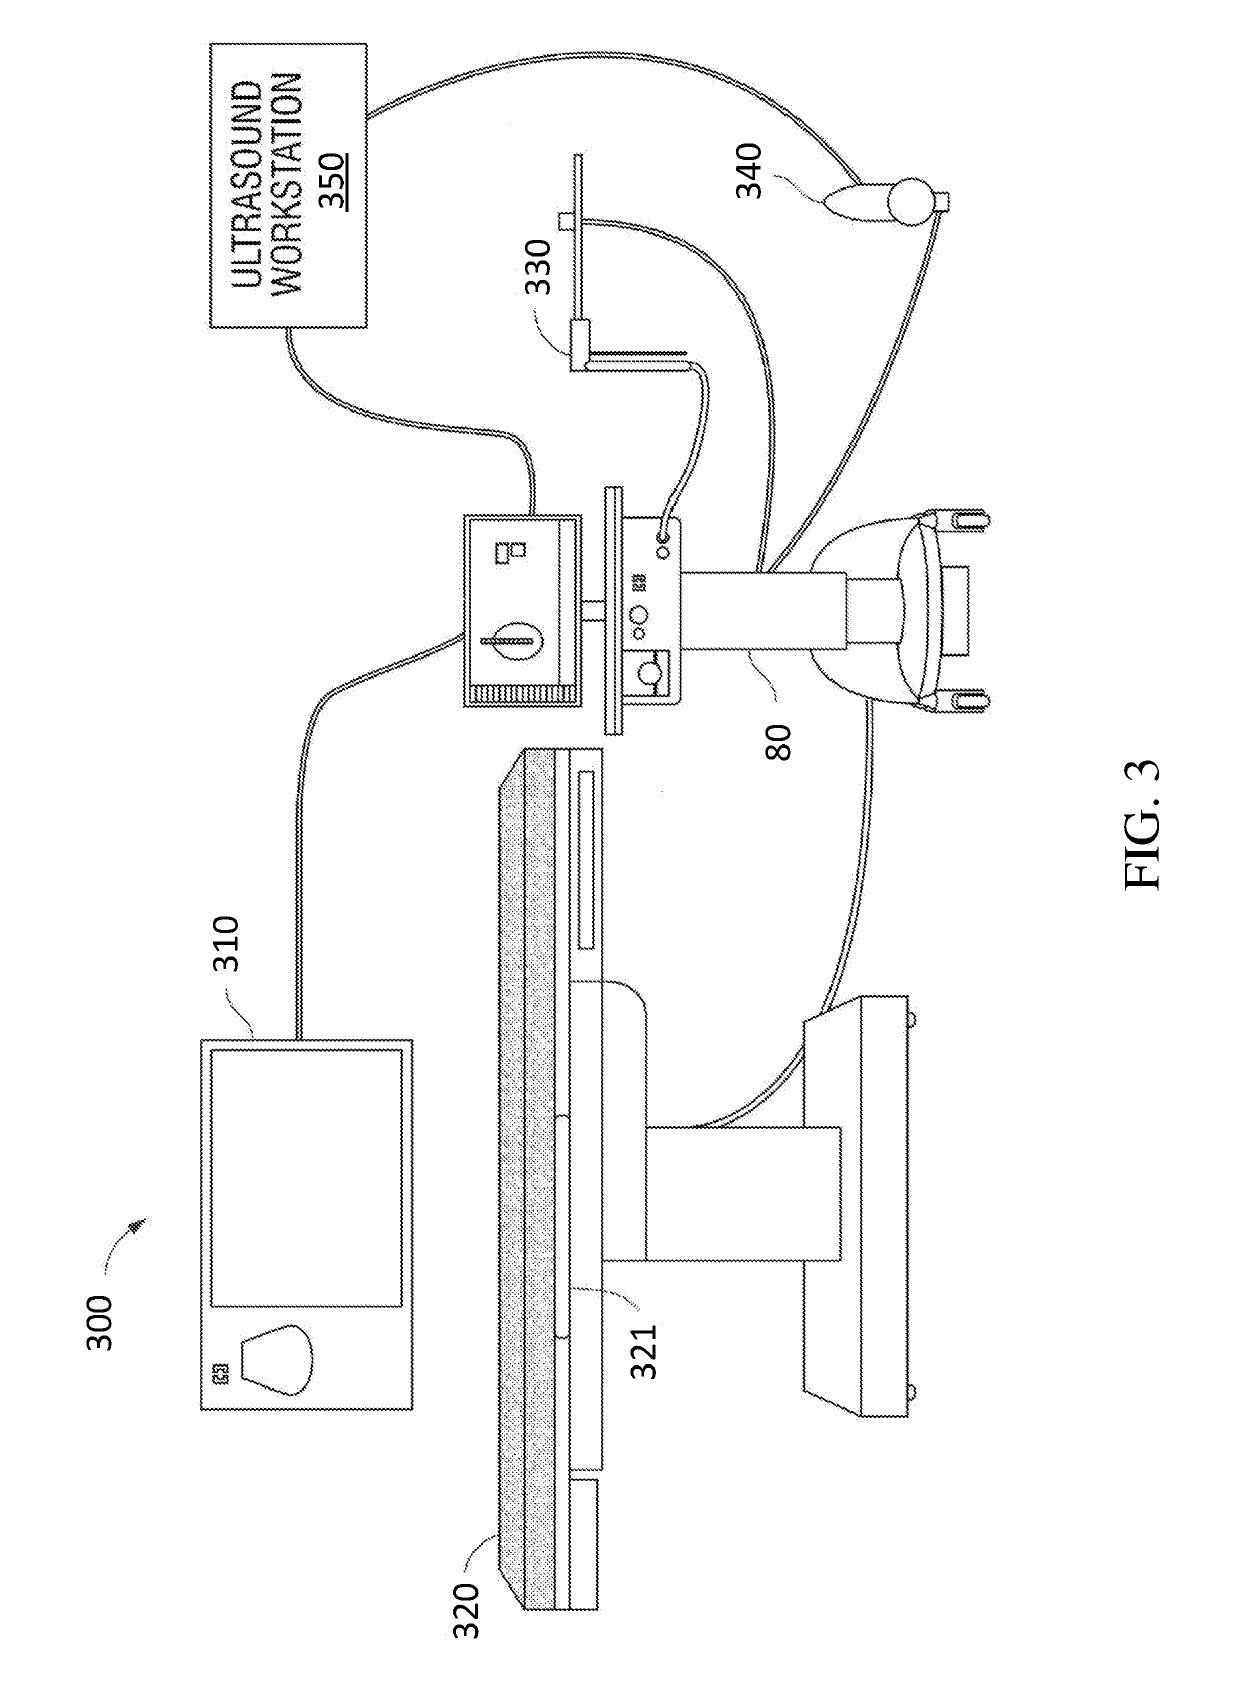 Pathway planning for use with a navigation planning and procedure system